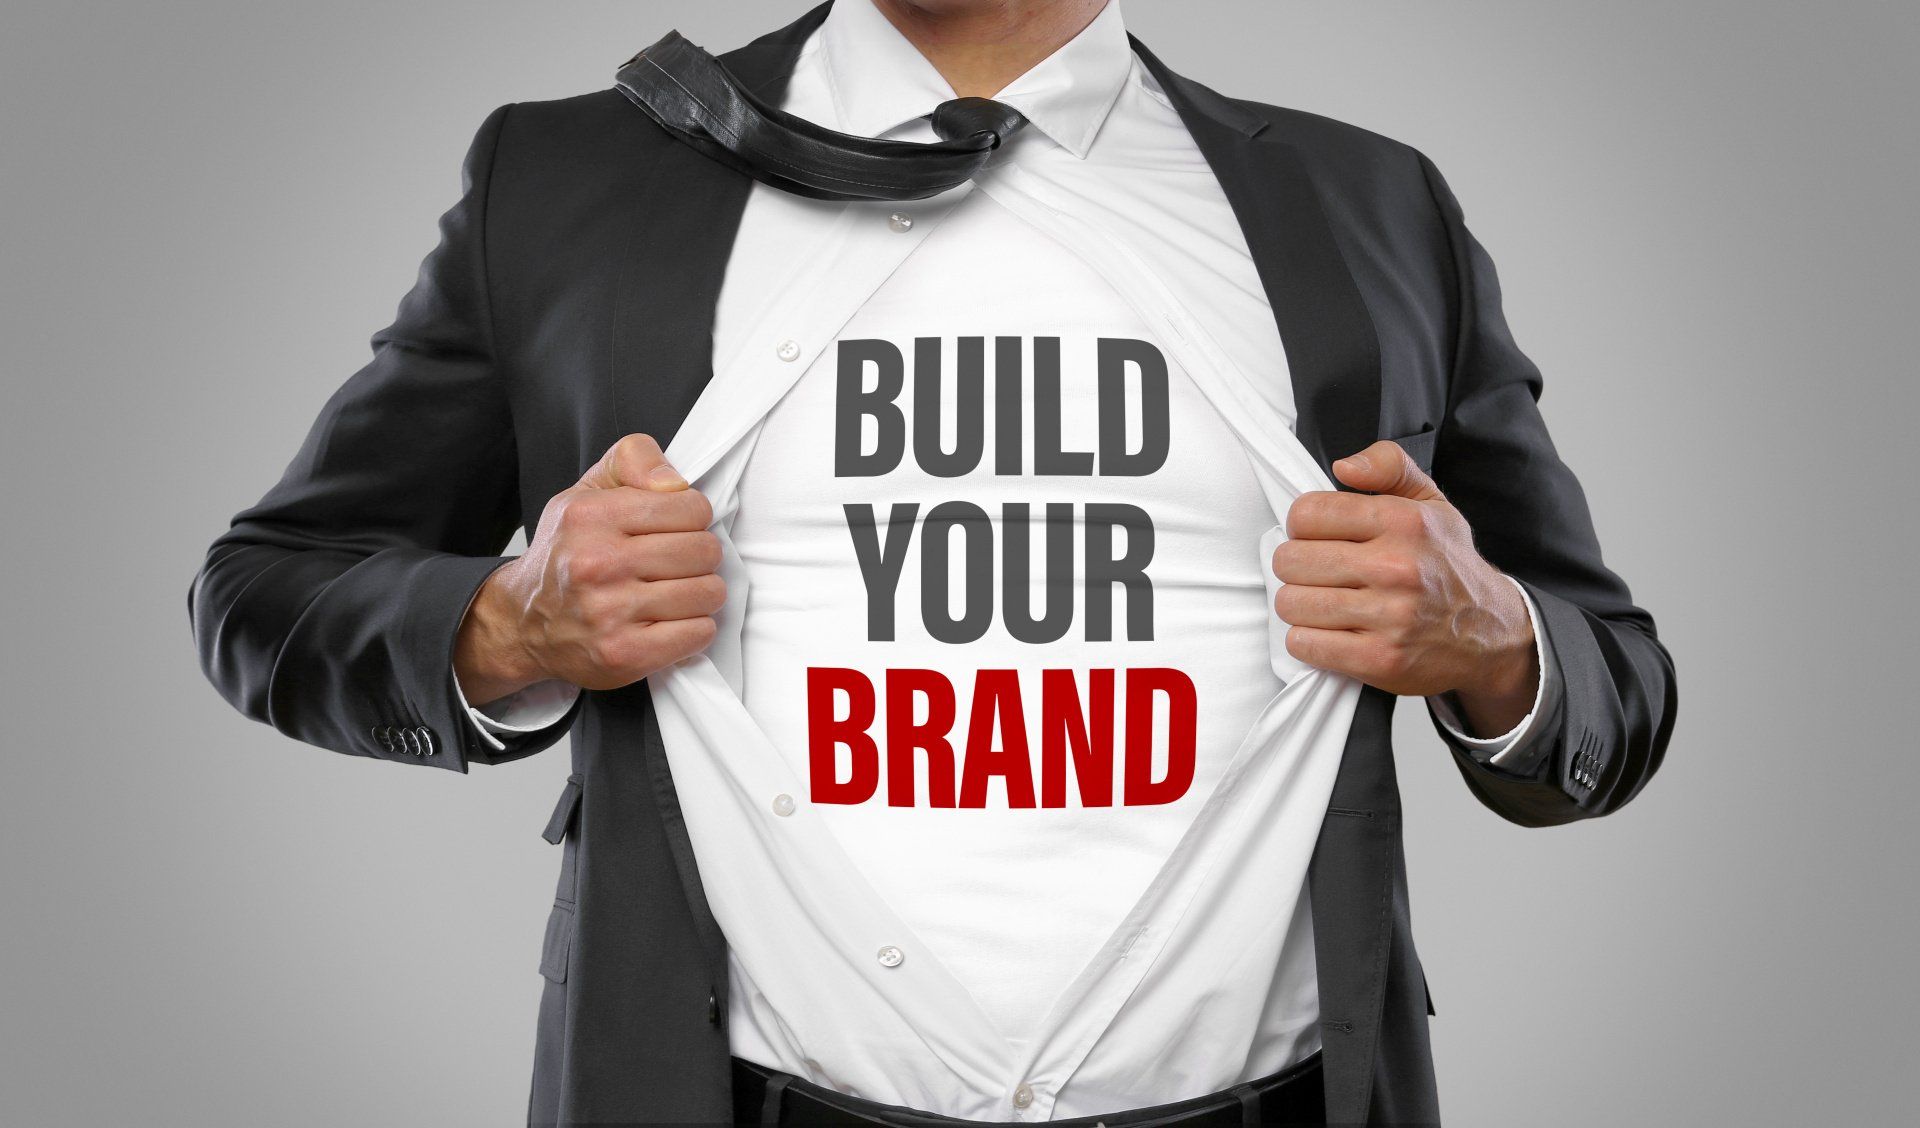 Build Your Brand Online and watch your business grow.